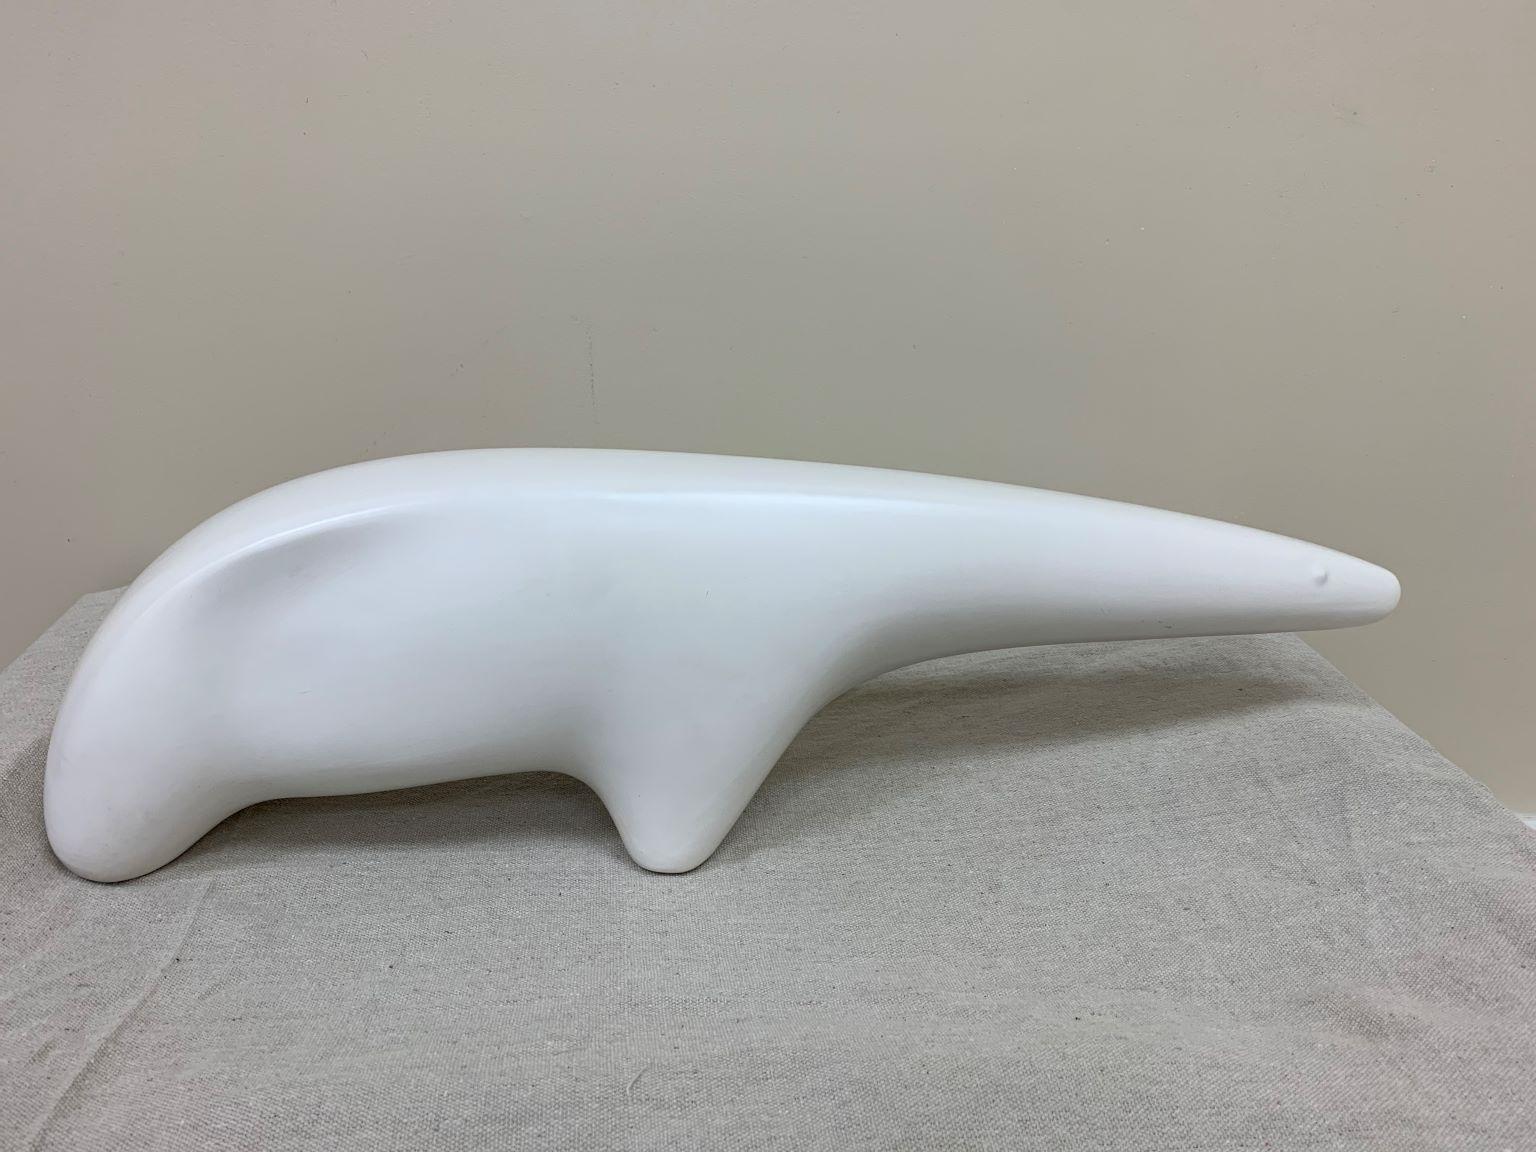 Gordon Newell Anteater Sculpture by Architectural Pottery, circa 1958. Beautiful glazed ceramic piece of pottery in excellent condition.
Designed circa 1958
Model no. NB1
Architectural Pottery
Measures: 8